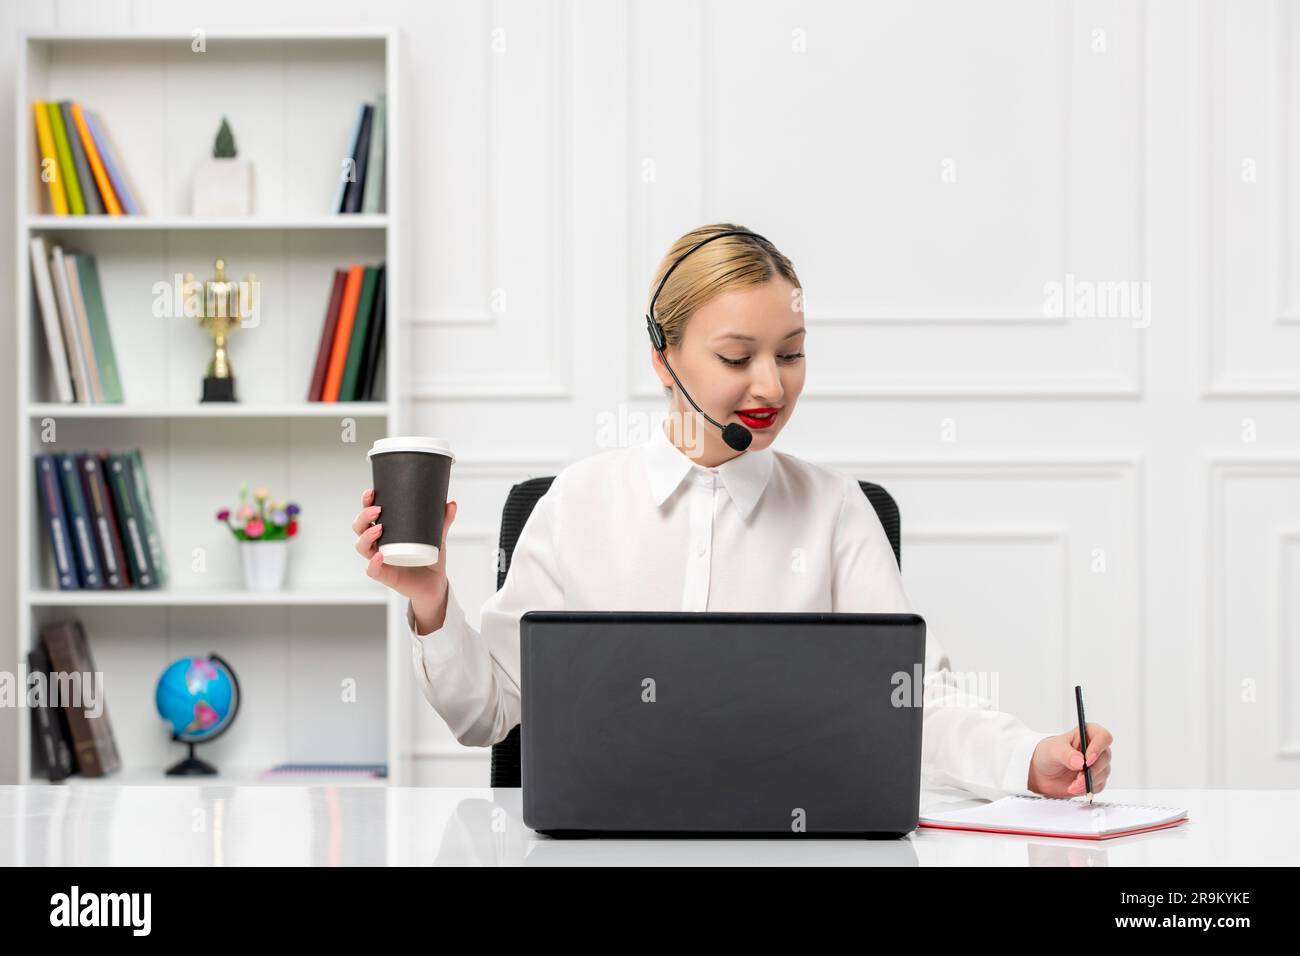 customer service cute blonde girl office shirt with headset and computer taking down notes Stock Photo